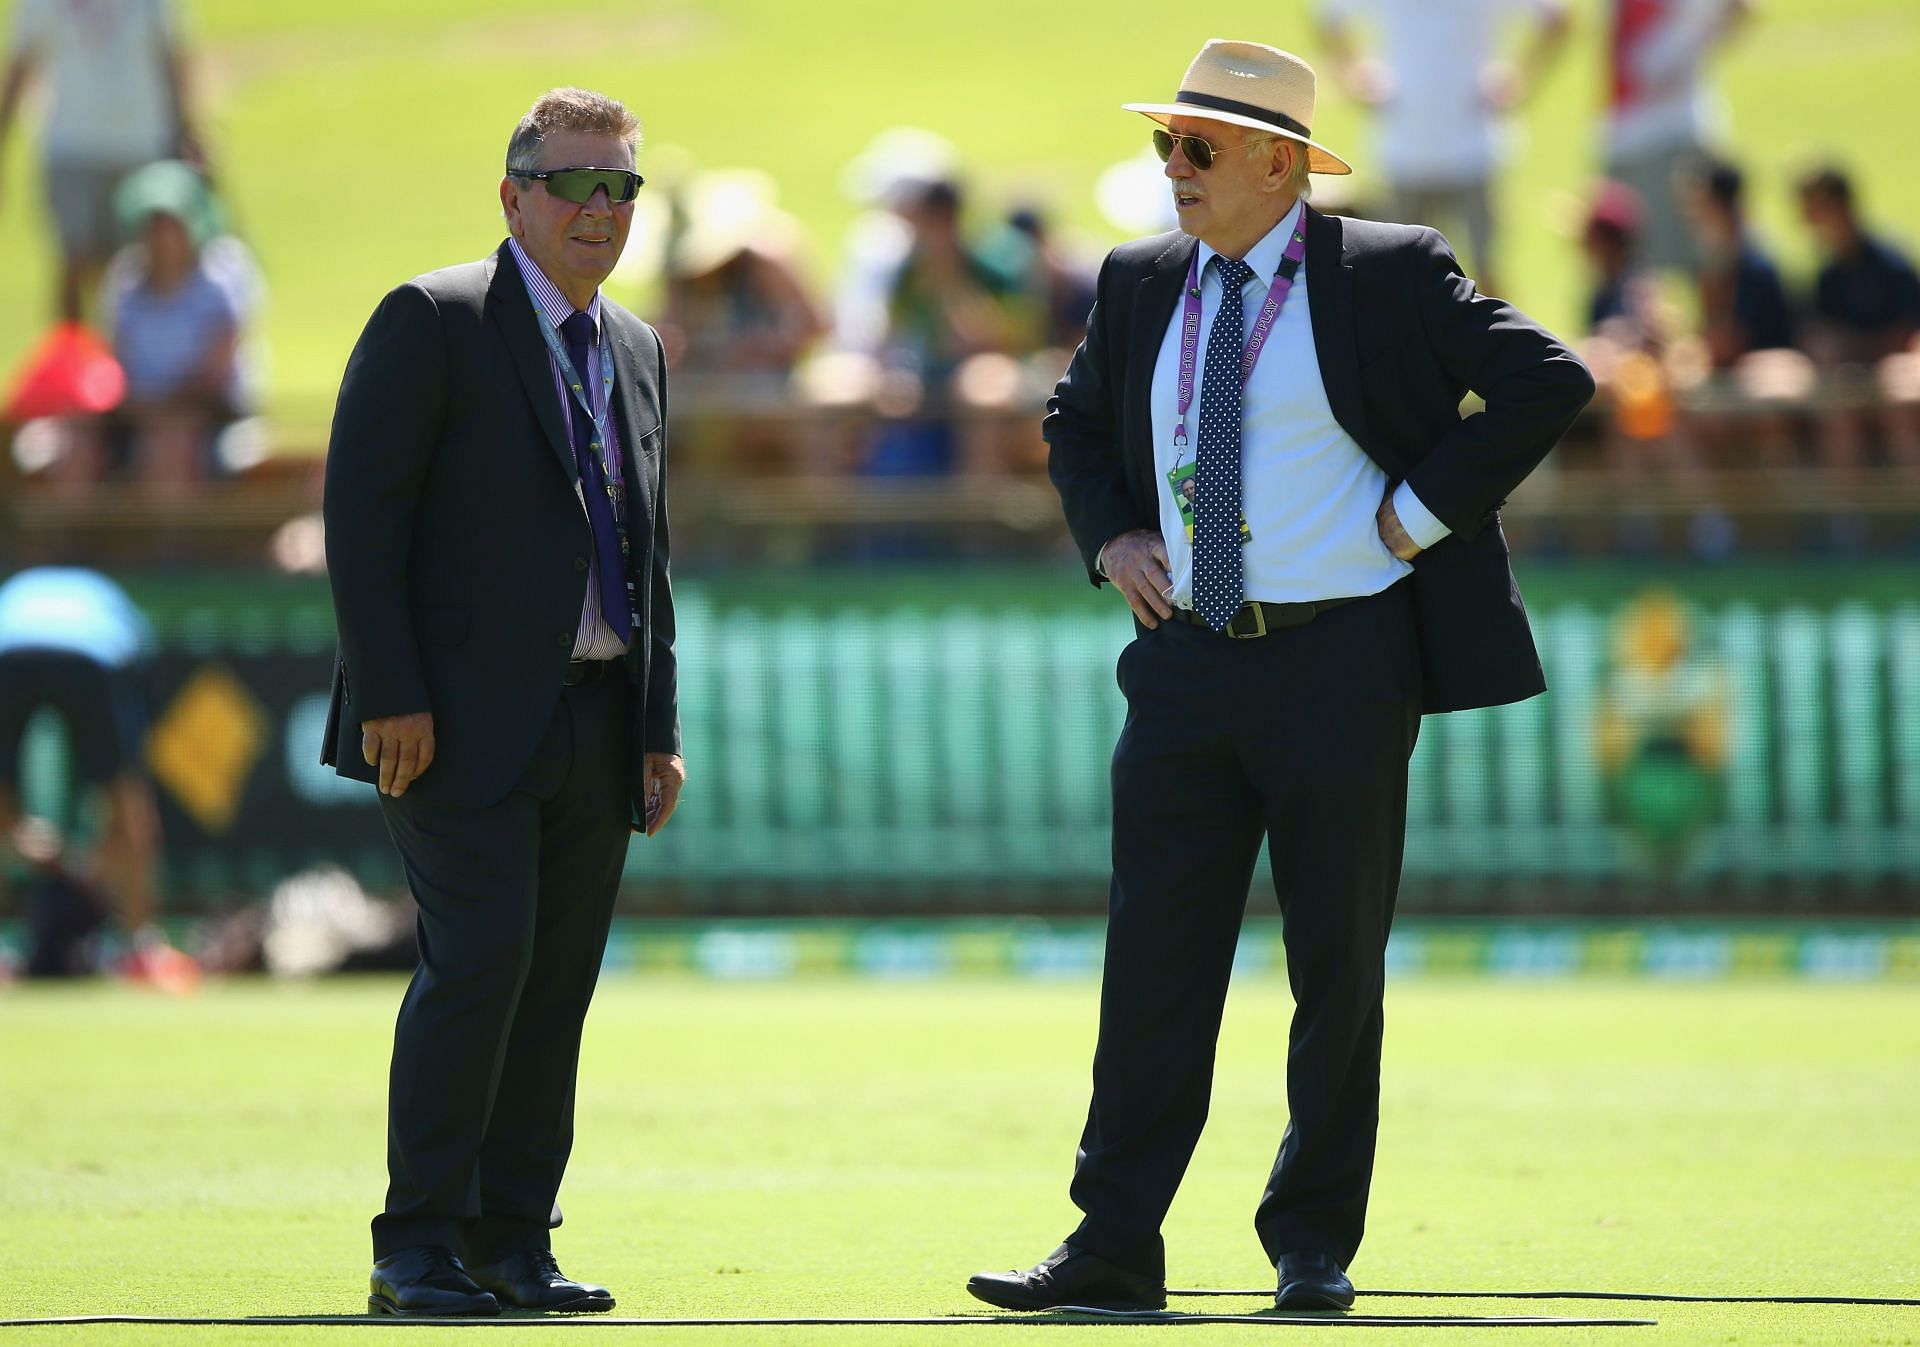 Rod Marsh and Ian Chappell. (Image Credits: Getty)